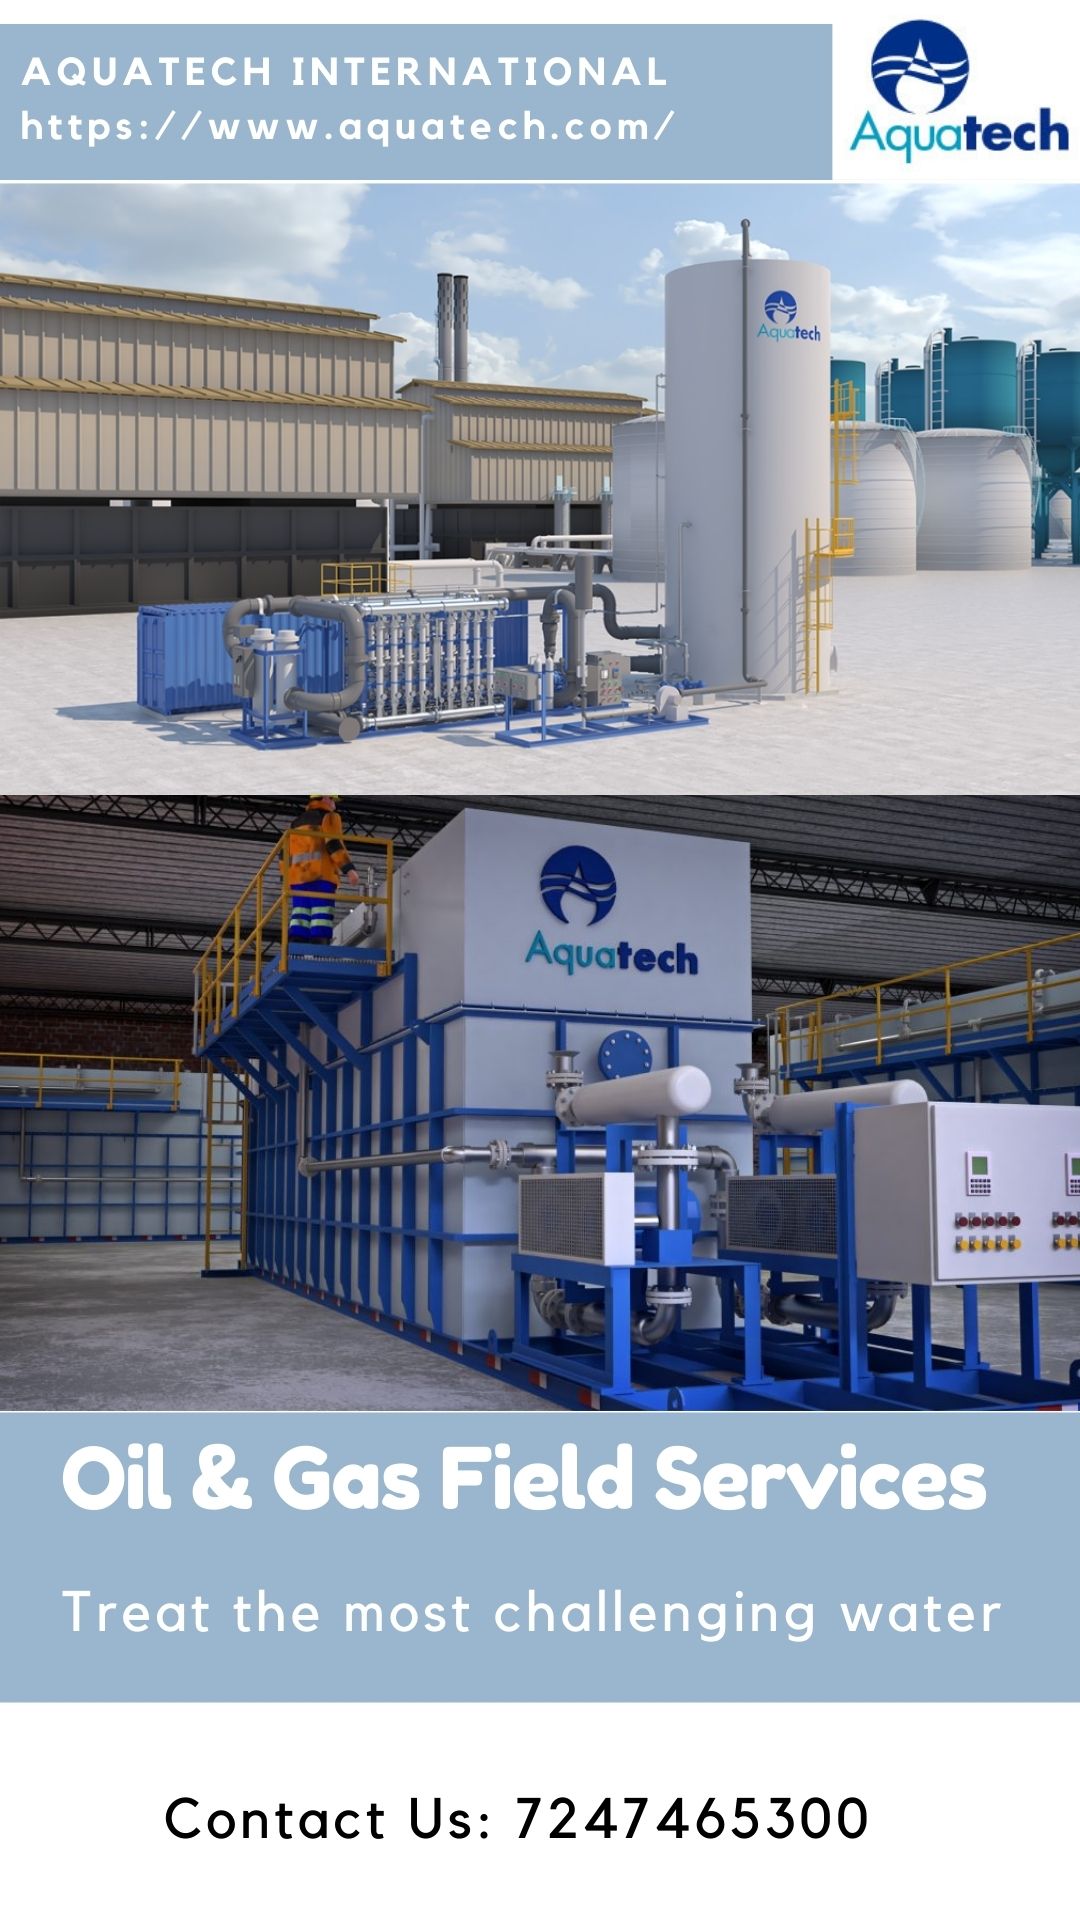 Aquatech is a water treatment facility dedicated to providing the most valuable solutions.